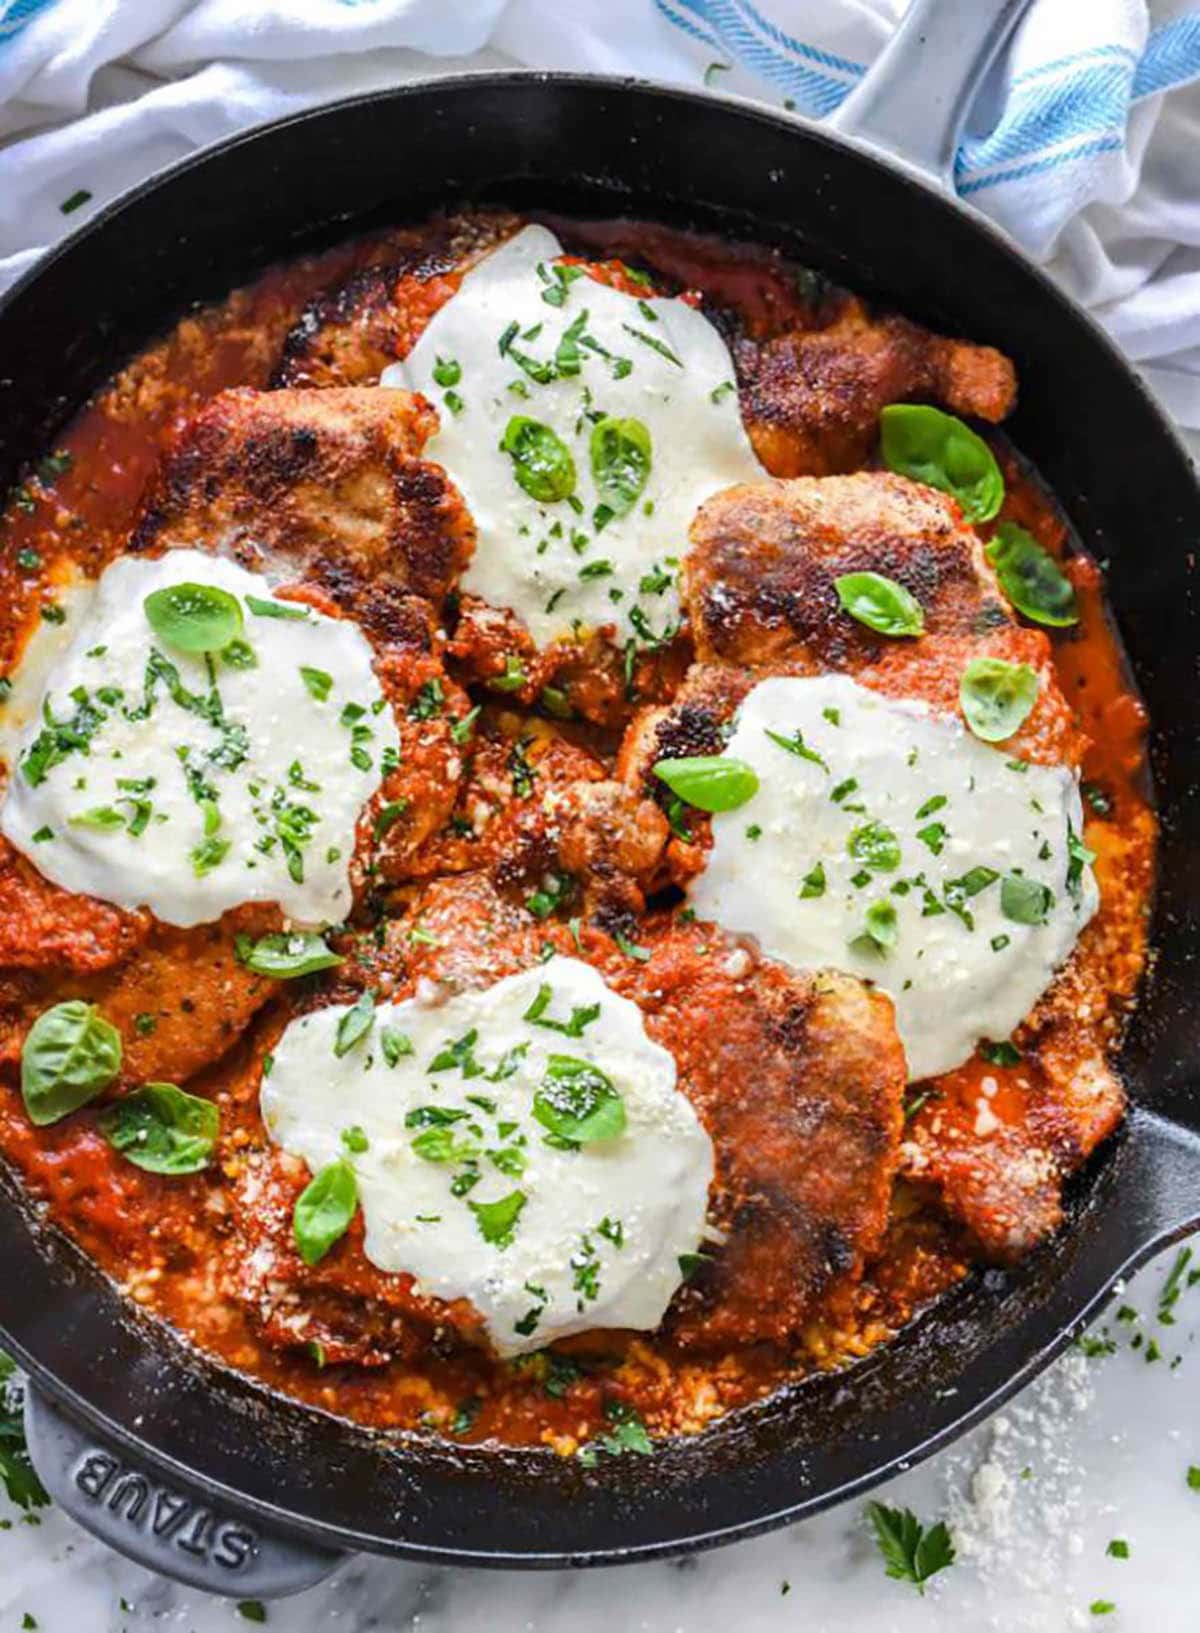 Chicken Parmesan topped with mozzarella and basil leaves